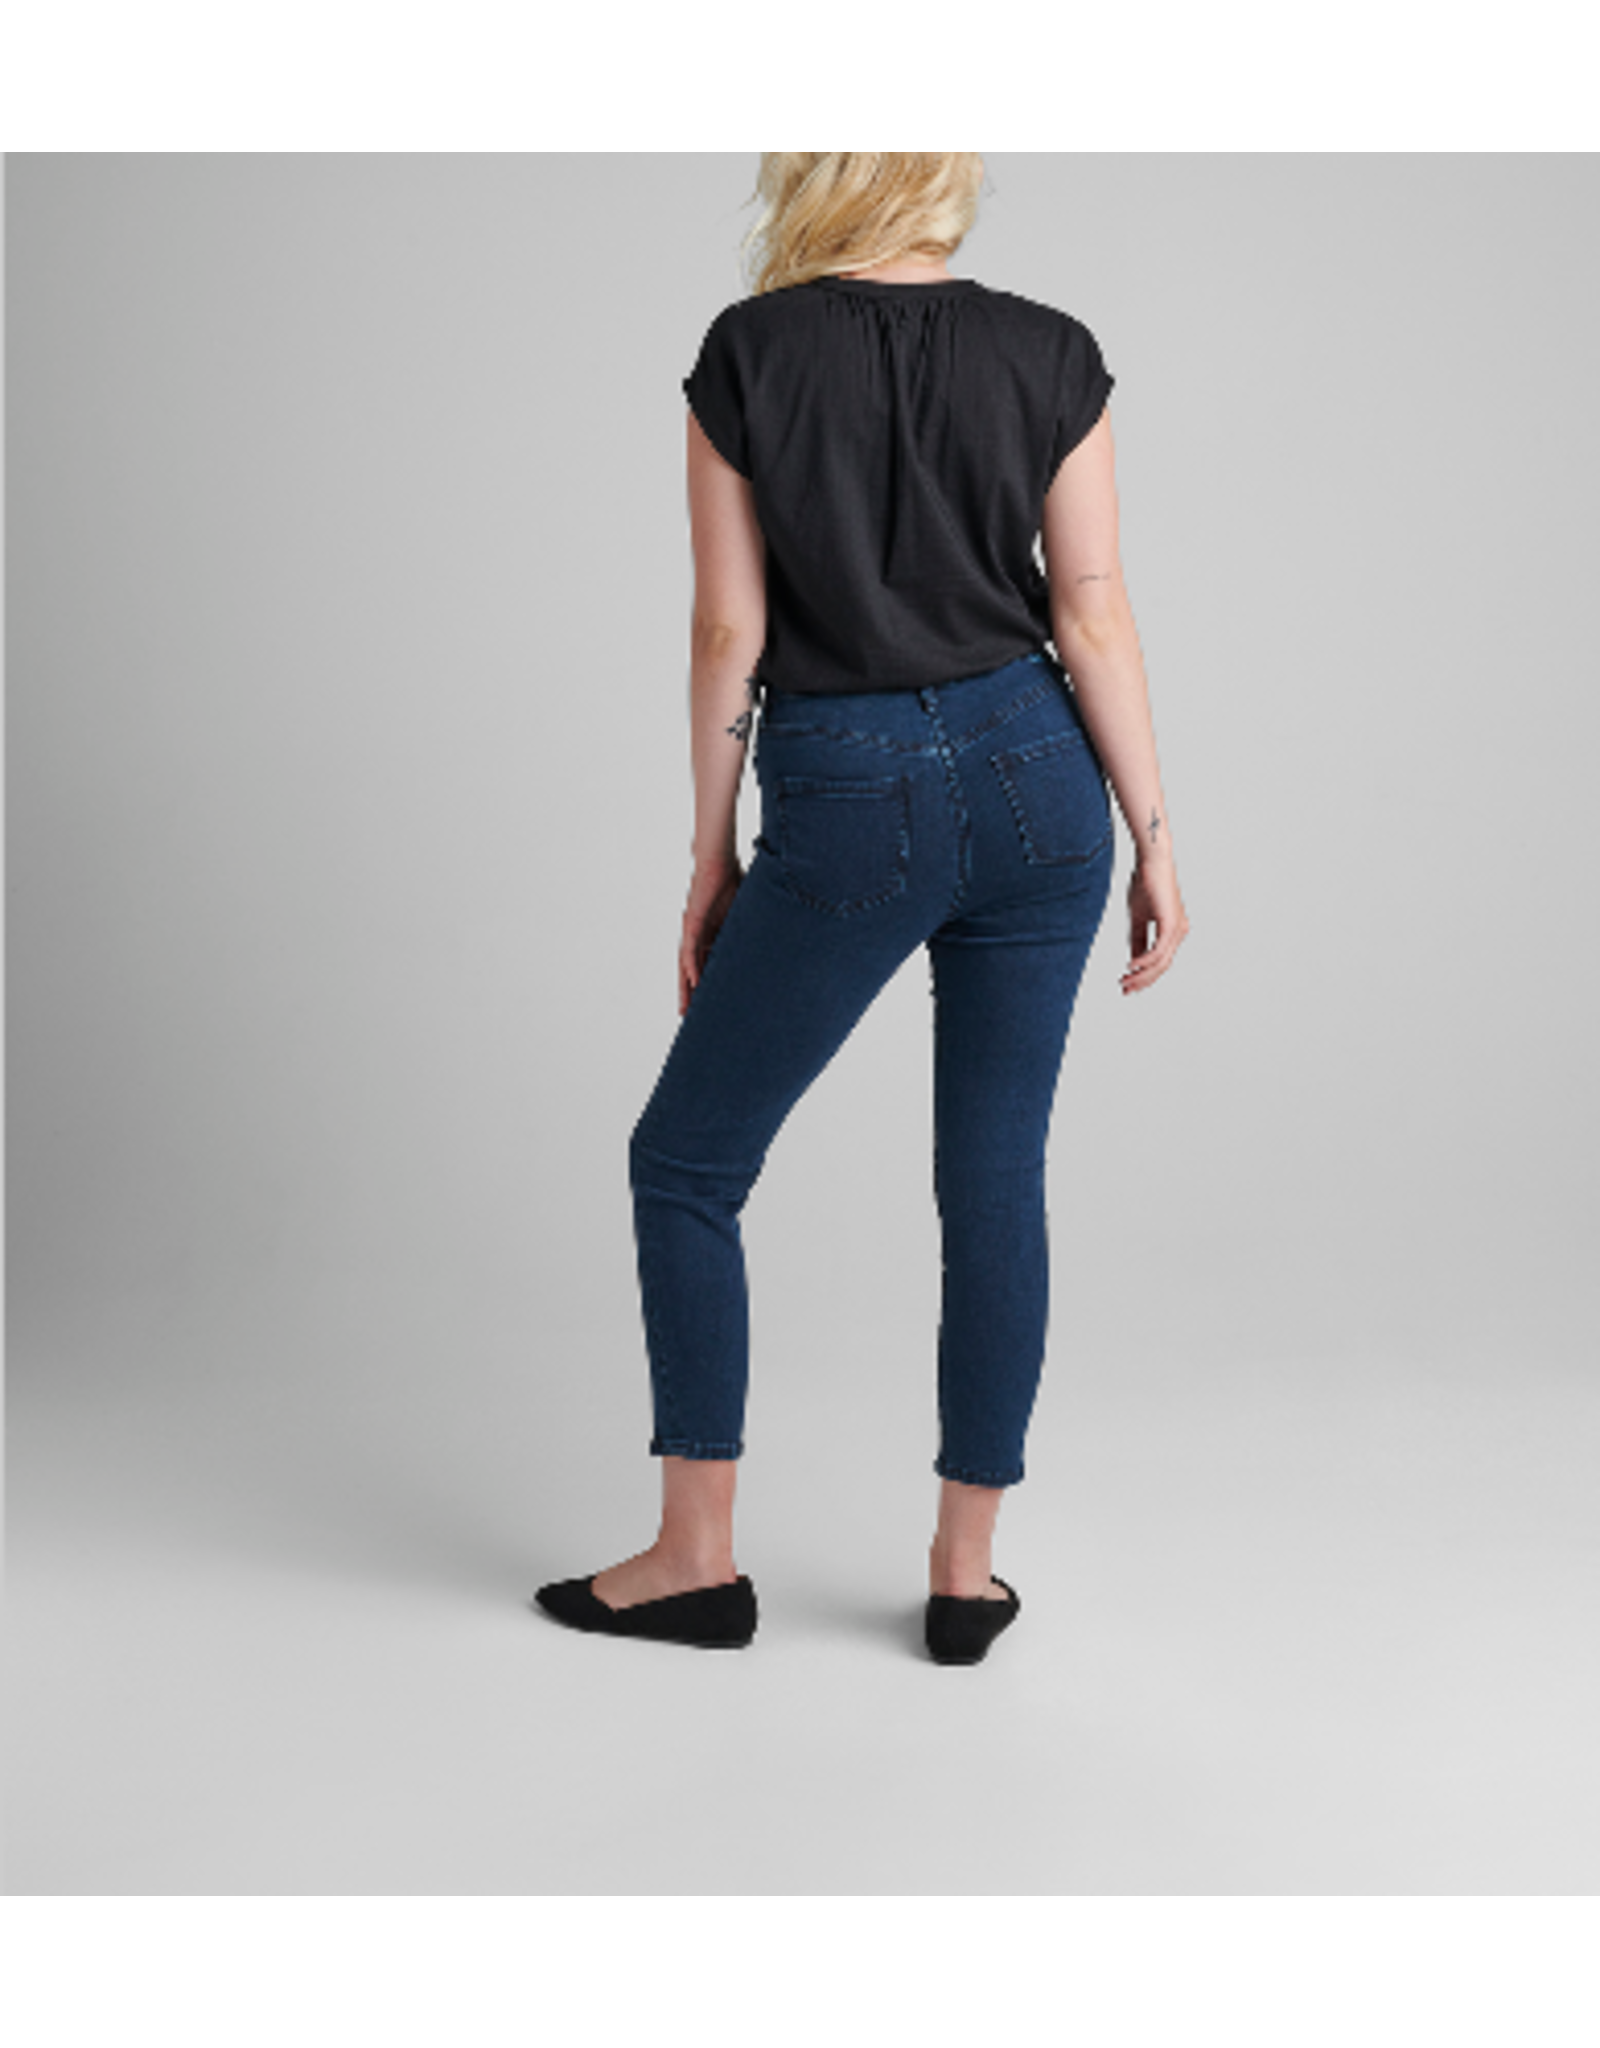 Jag Jeans Viola High Rise Ankle Skinny Jeans